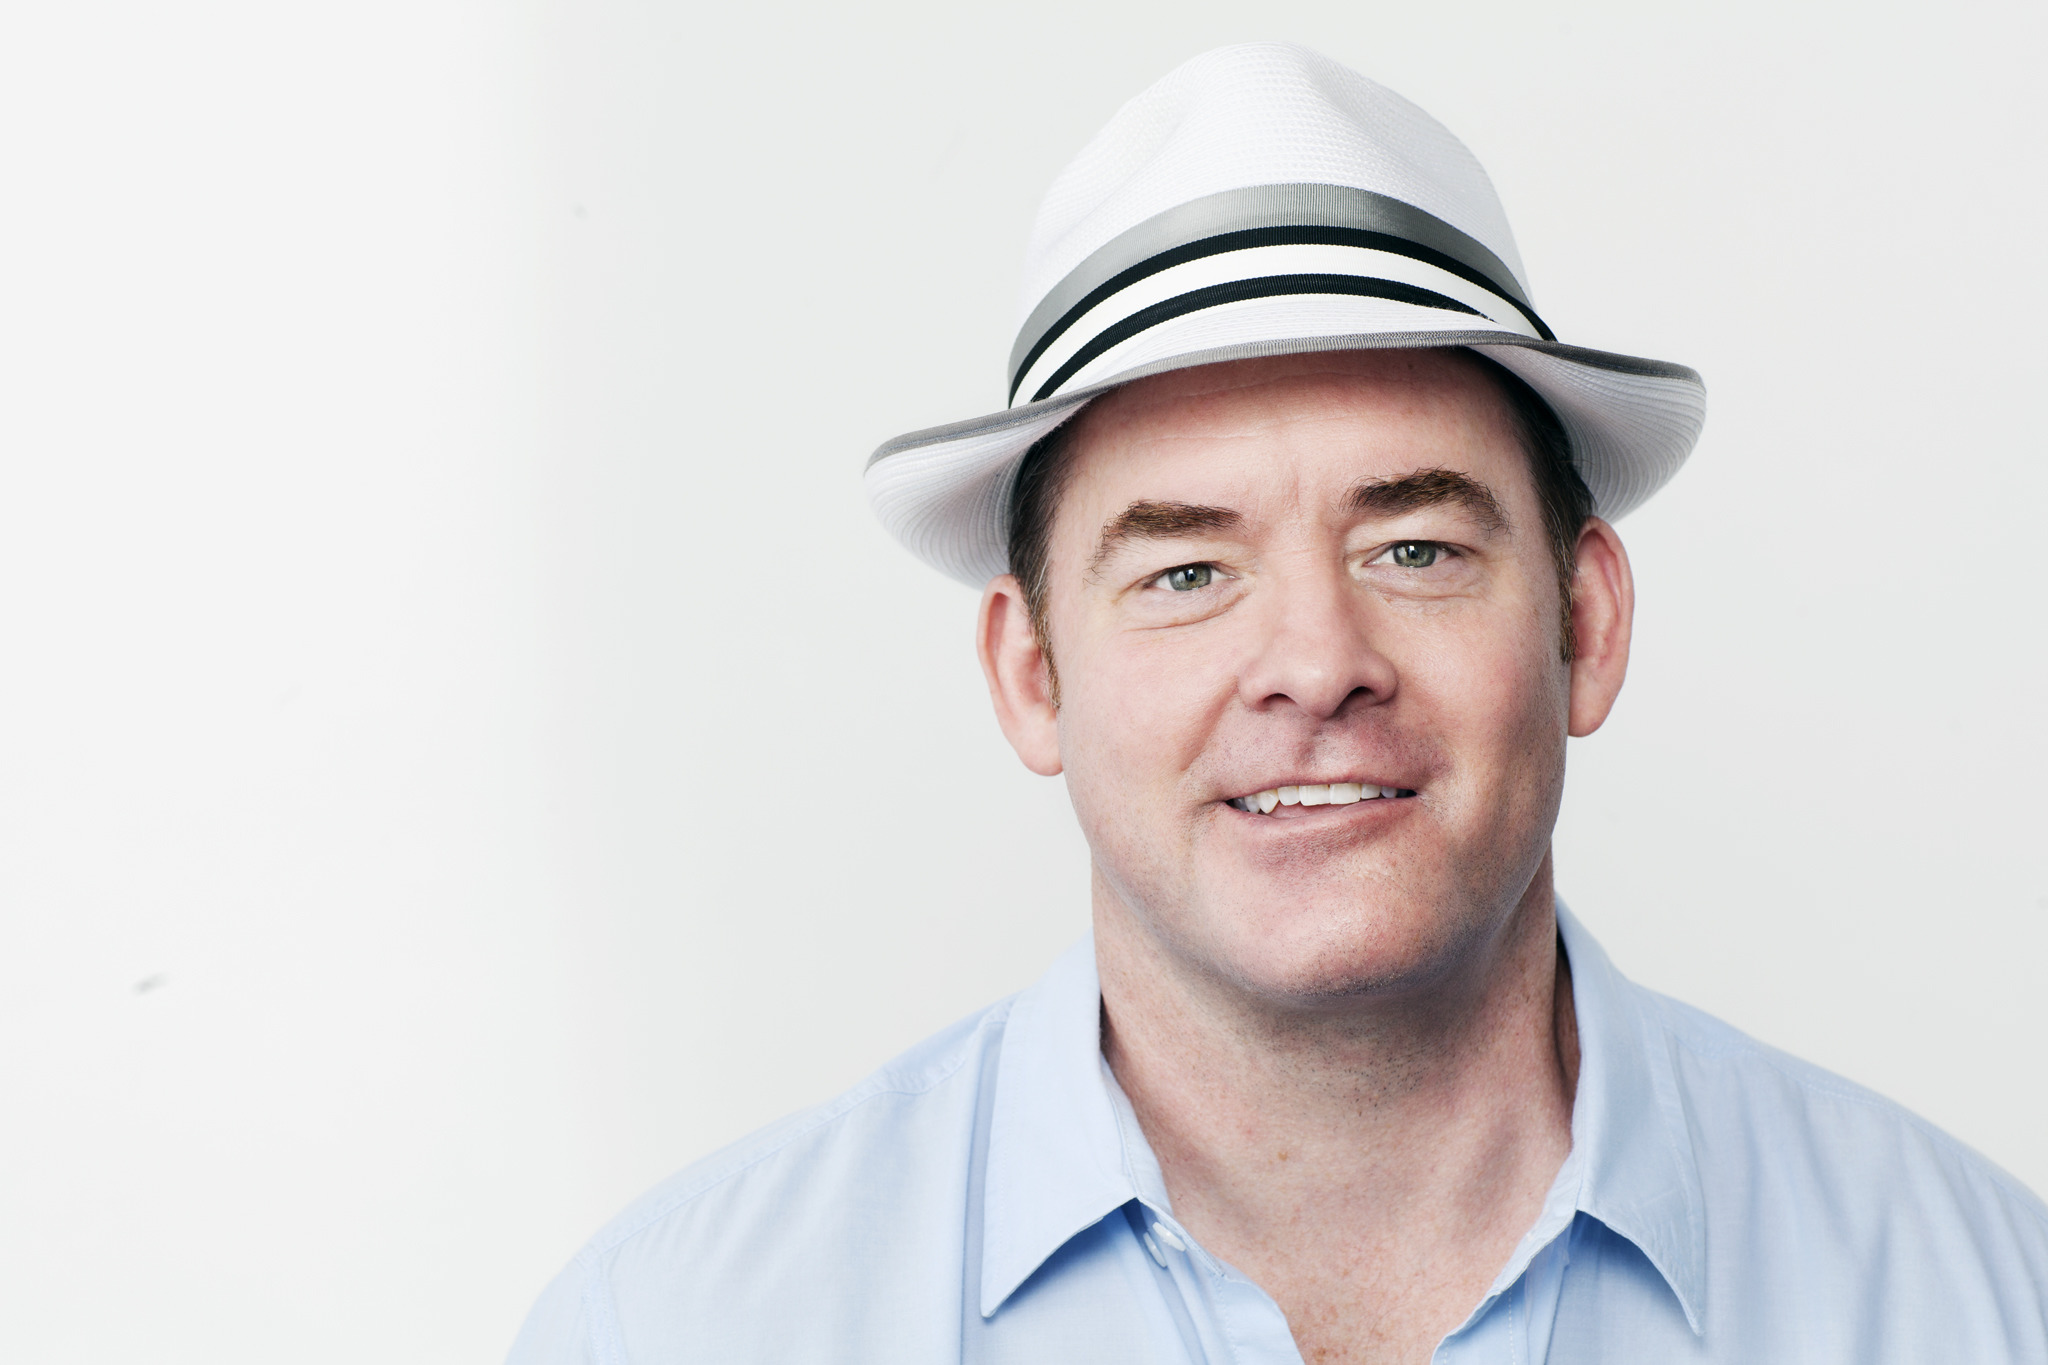 pictures from his david koechner movies